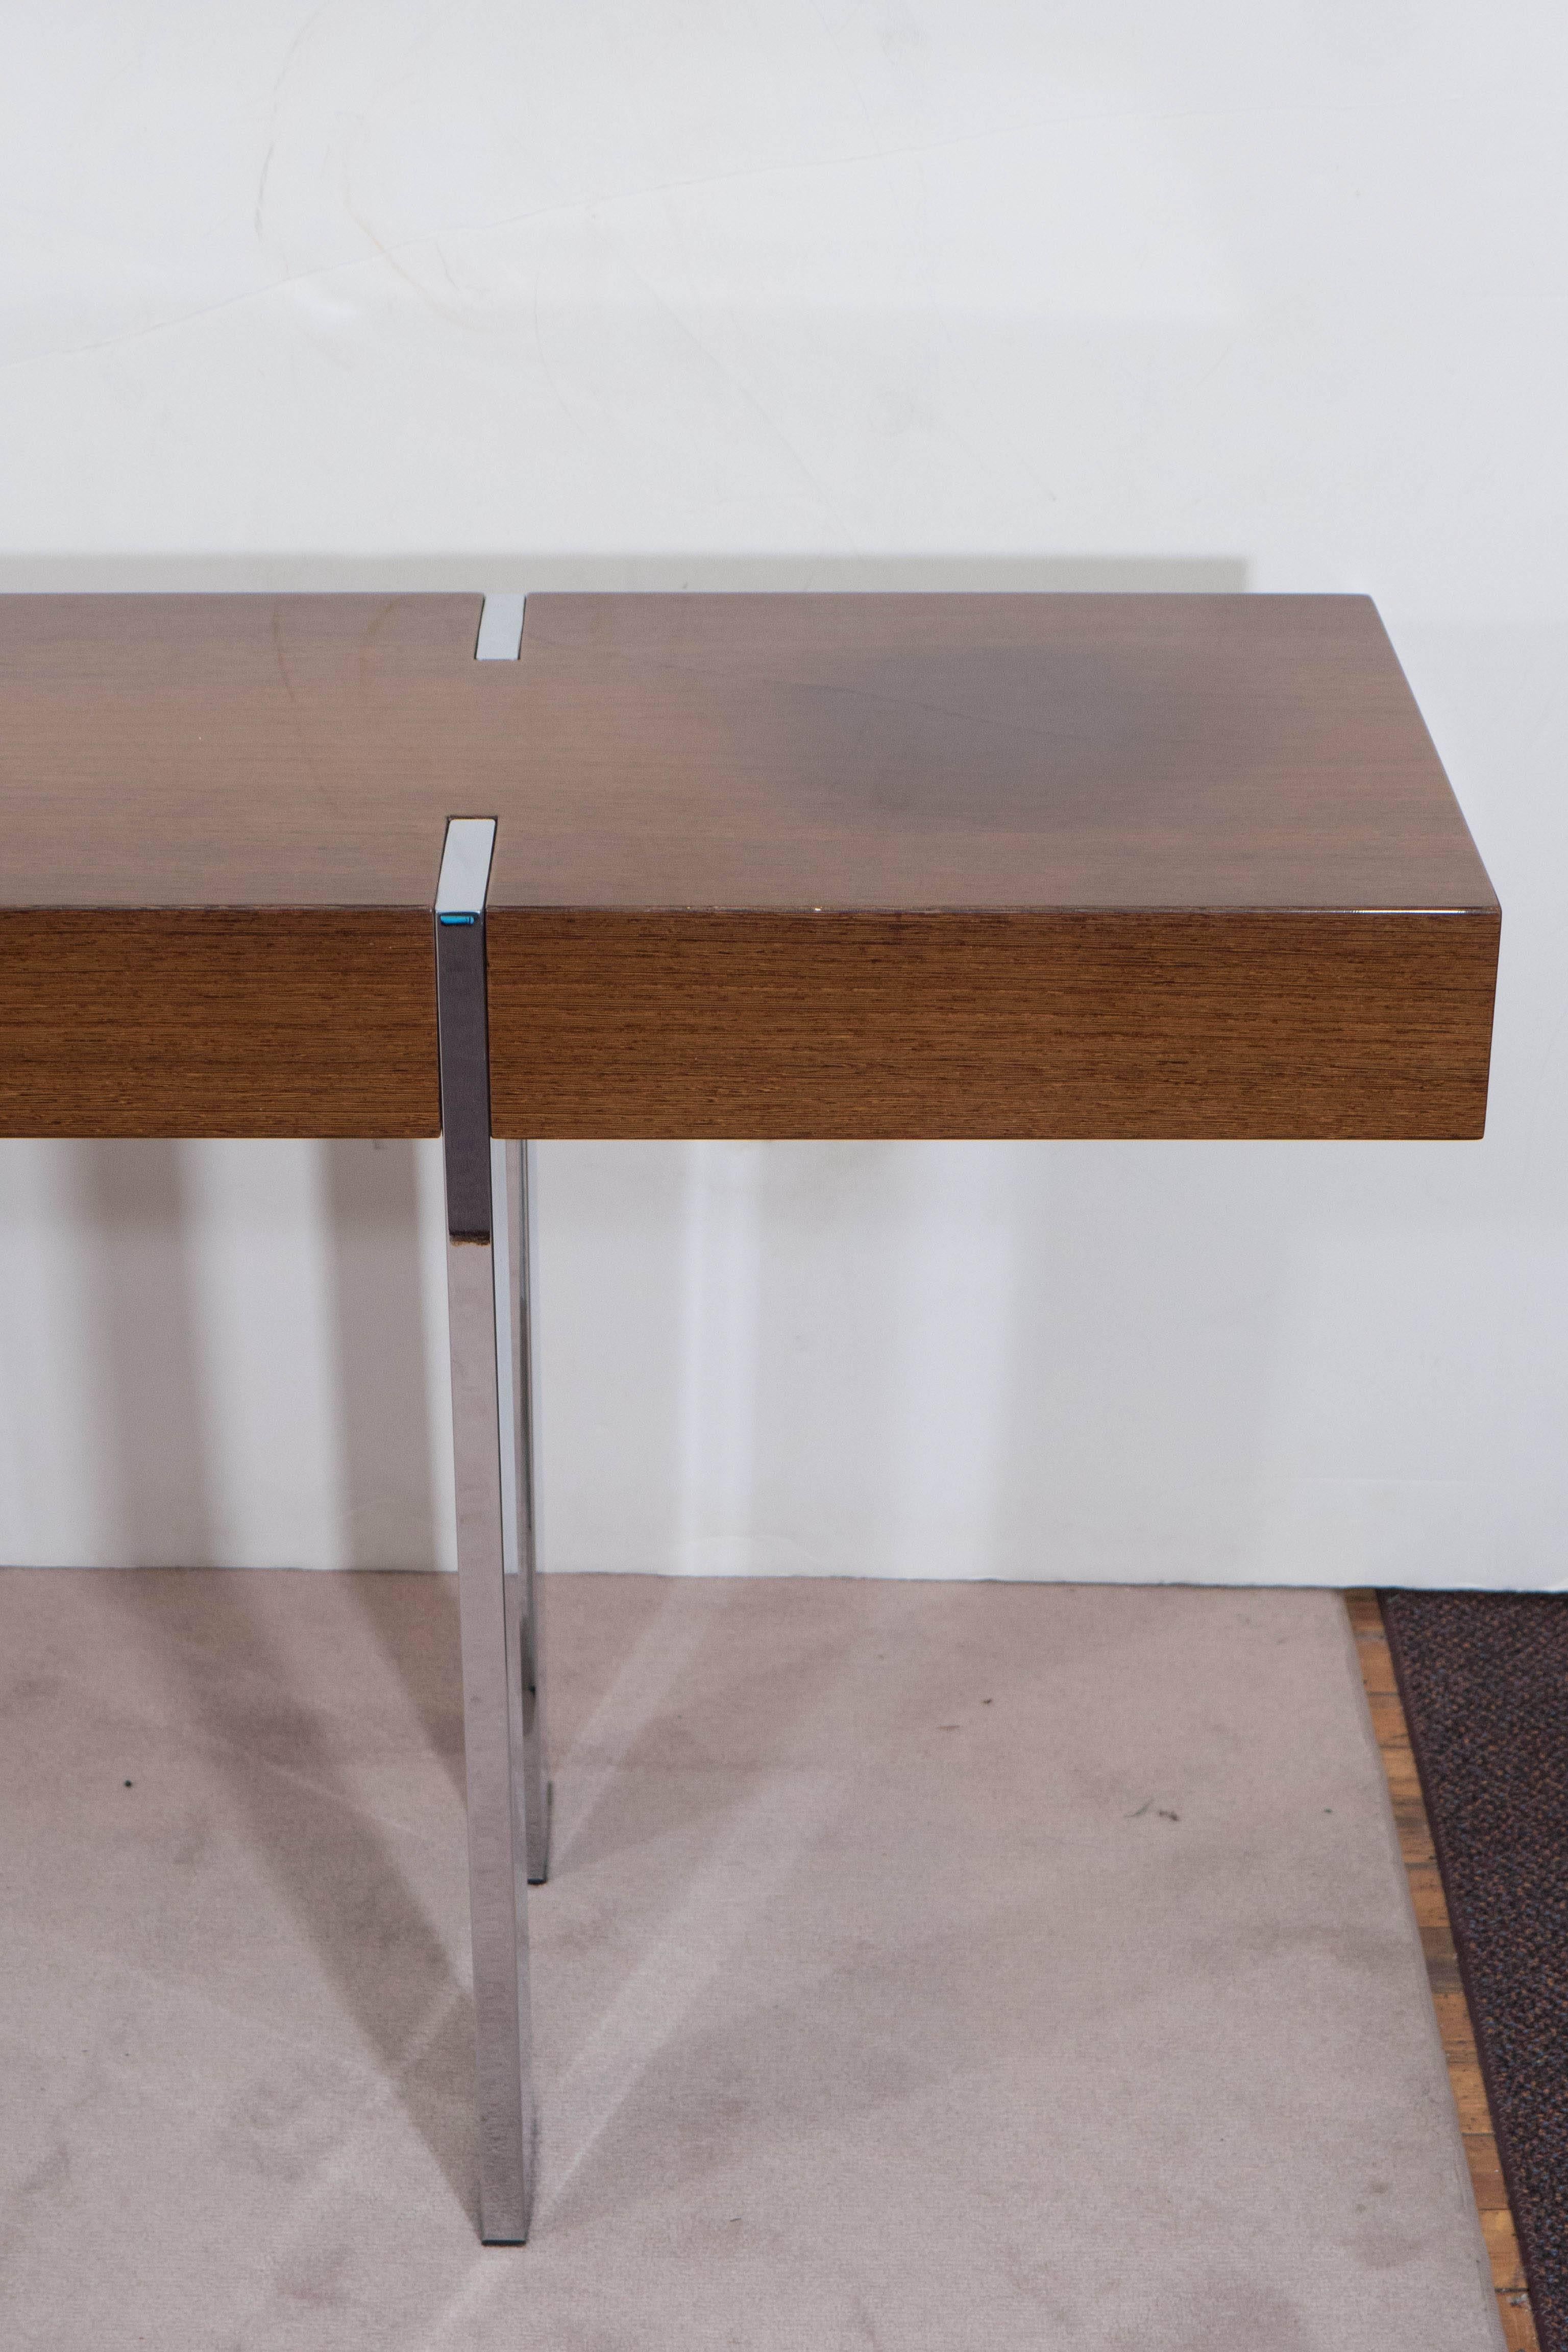 A lengthy console table, with high gloss lacquered wood top, mounted on chrome flat legs. Very good condition, wear consistent with age and use.

10427